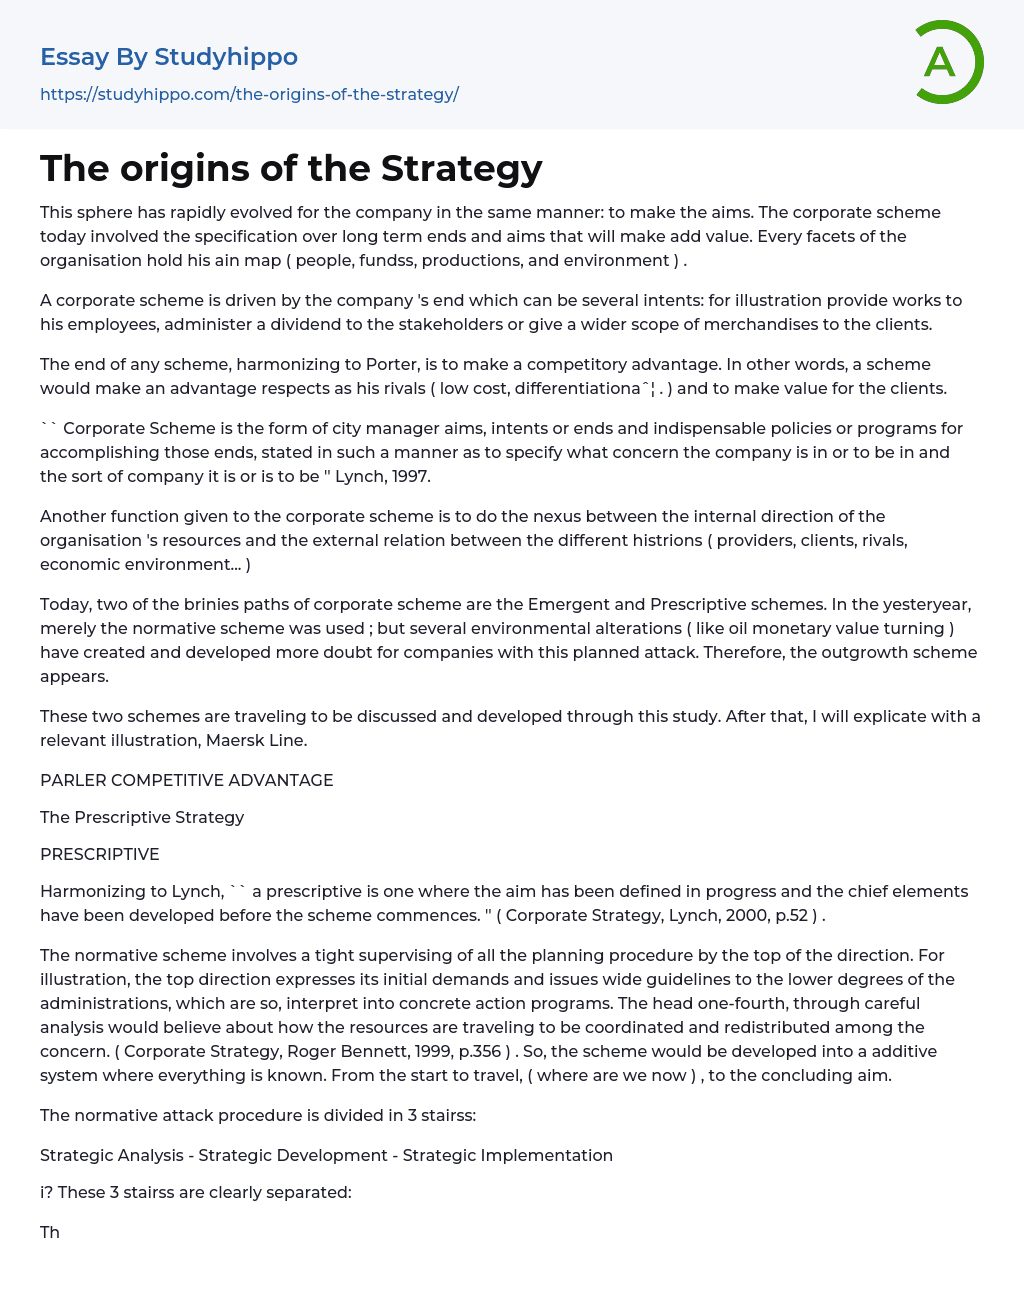 The origins of the Strategy Essay Example